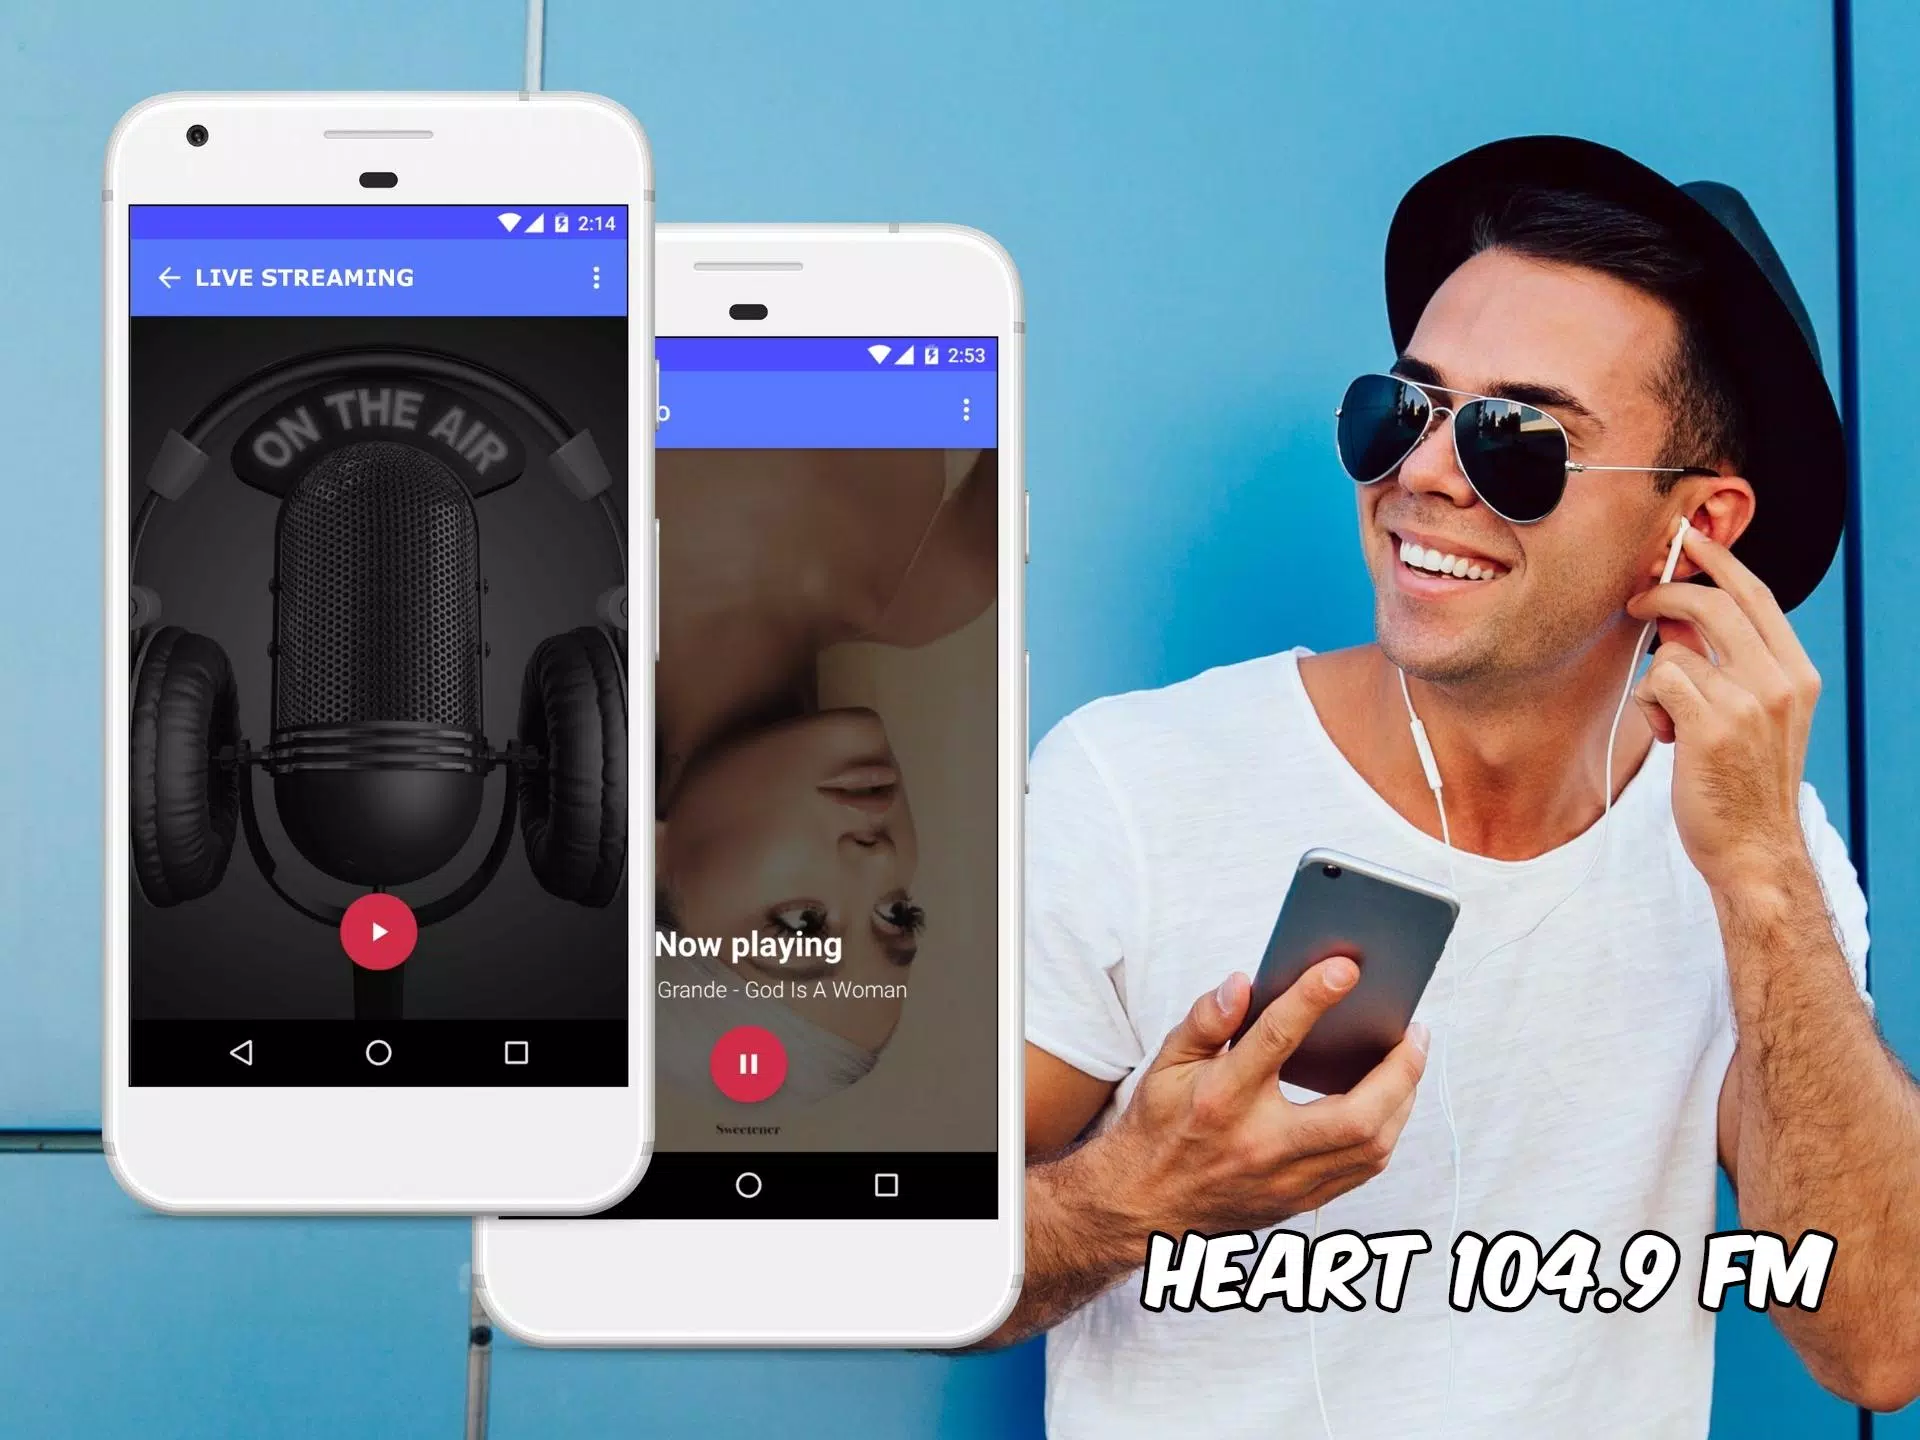 Heart 104.9 FM Radio Free Streaming for Android - APK Download